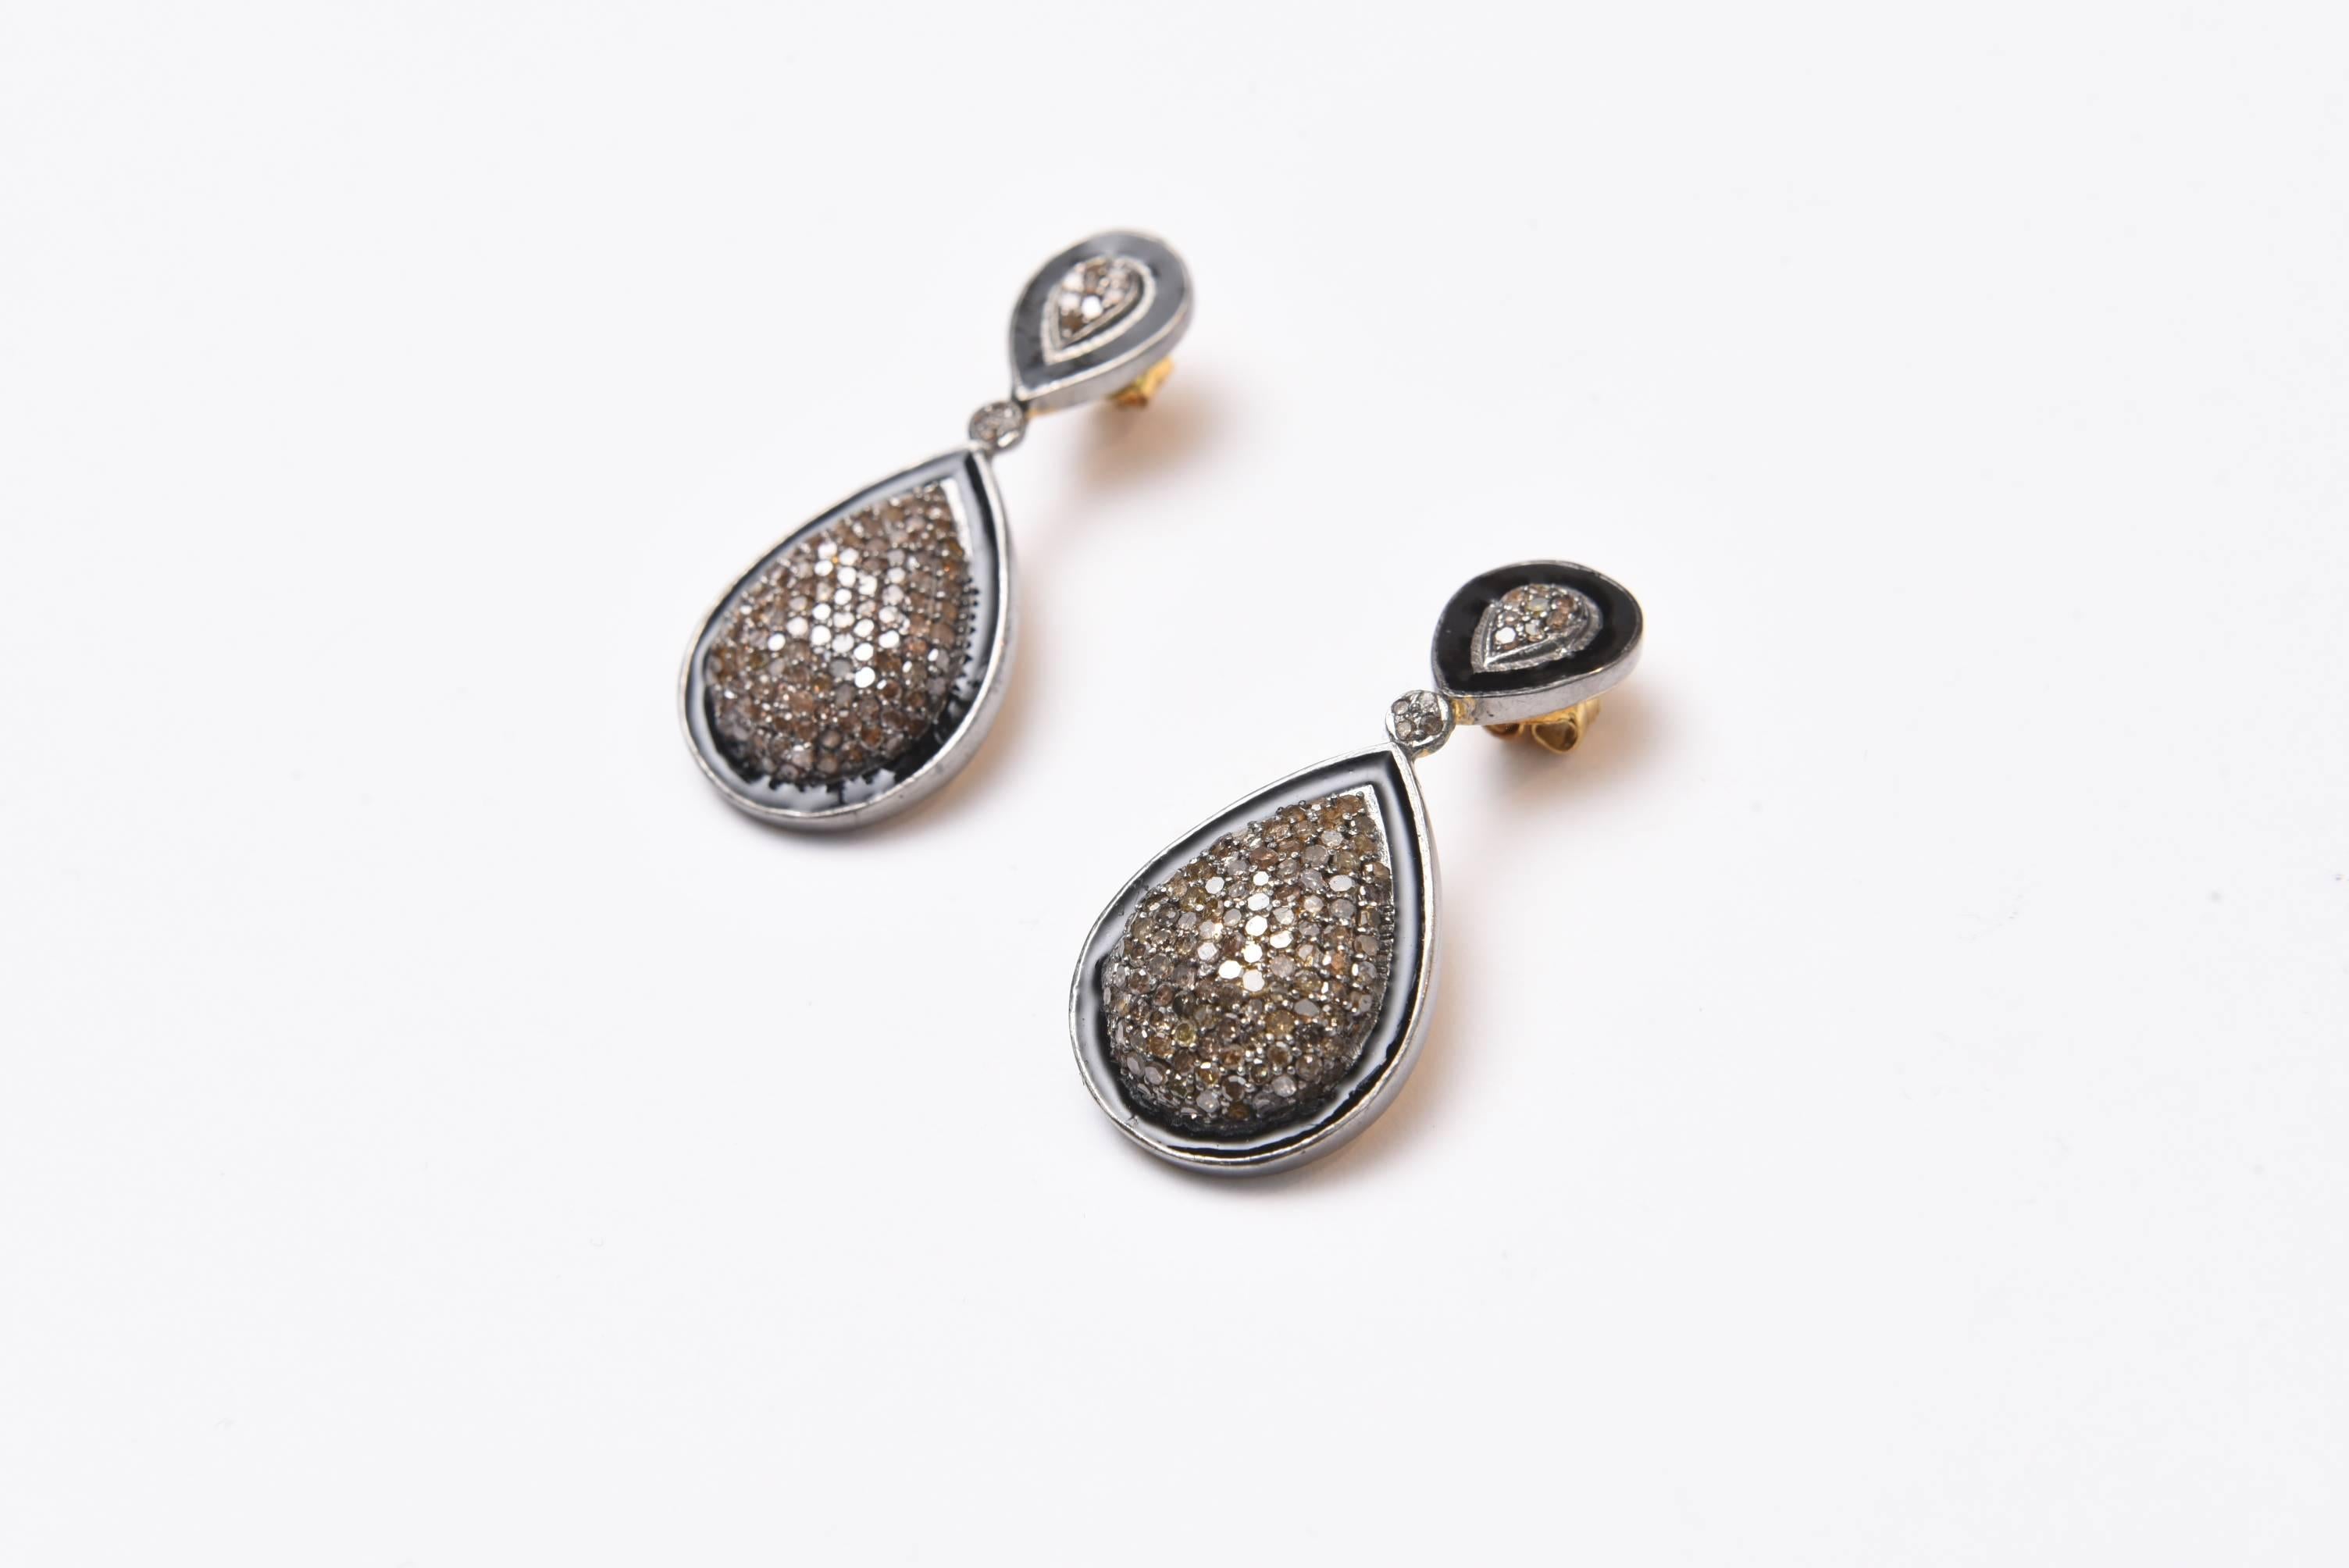 Stunning pair of pave` set diamonds bordered in black enamel set in sterling silver.  Carat weight of diamonds is 3.60.  18K gold post for pierced ears.